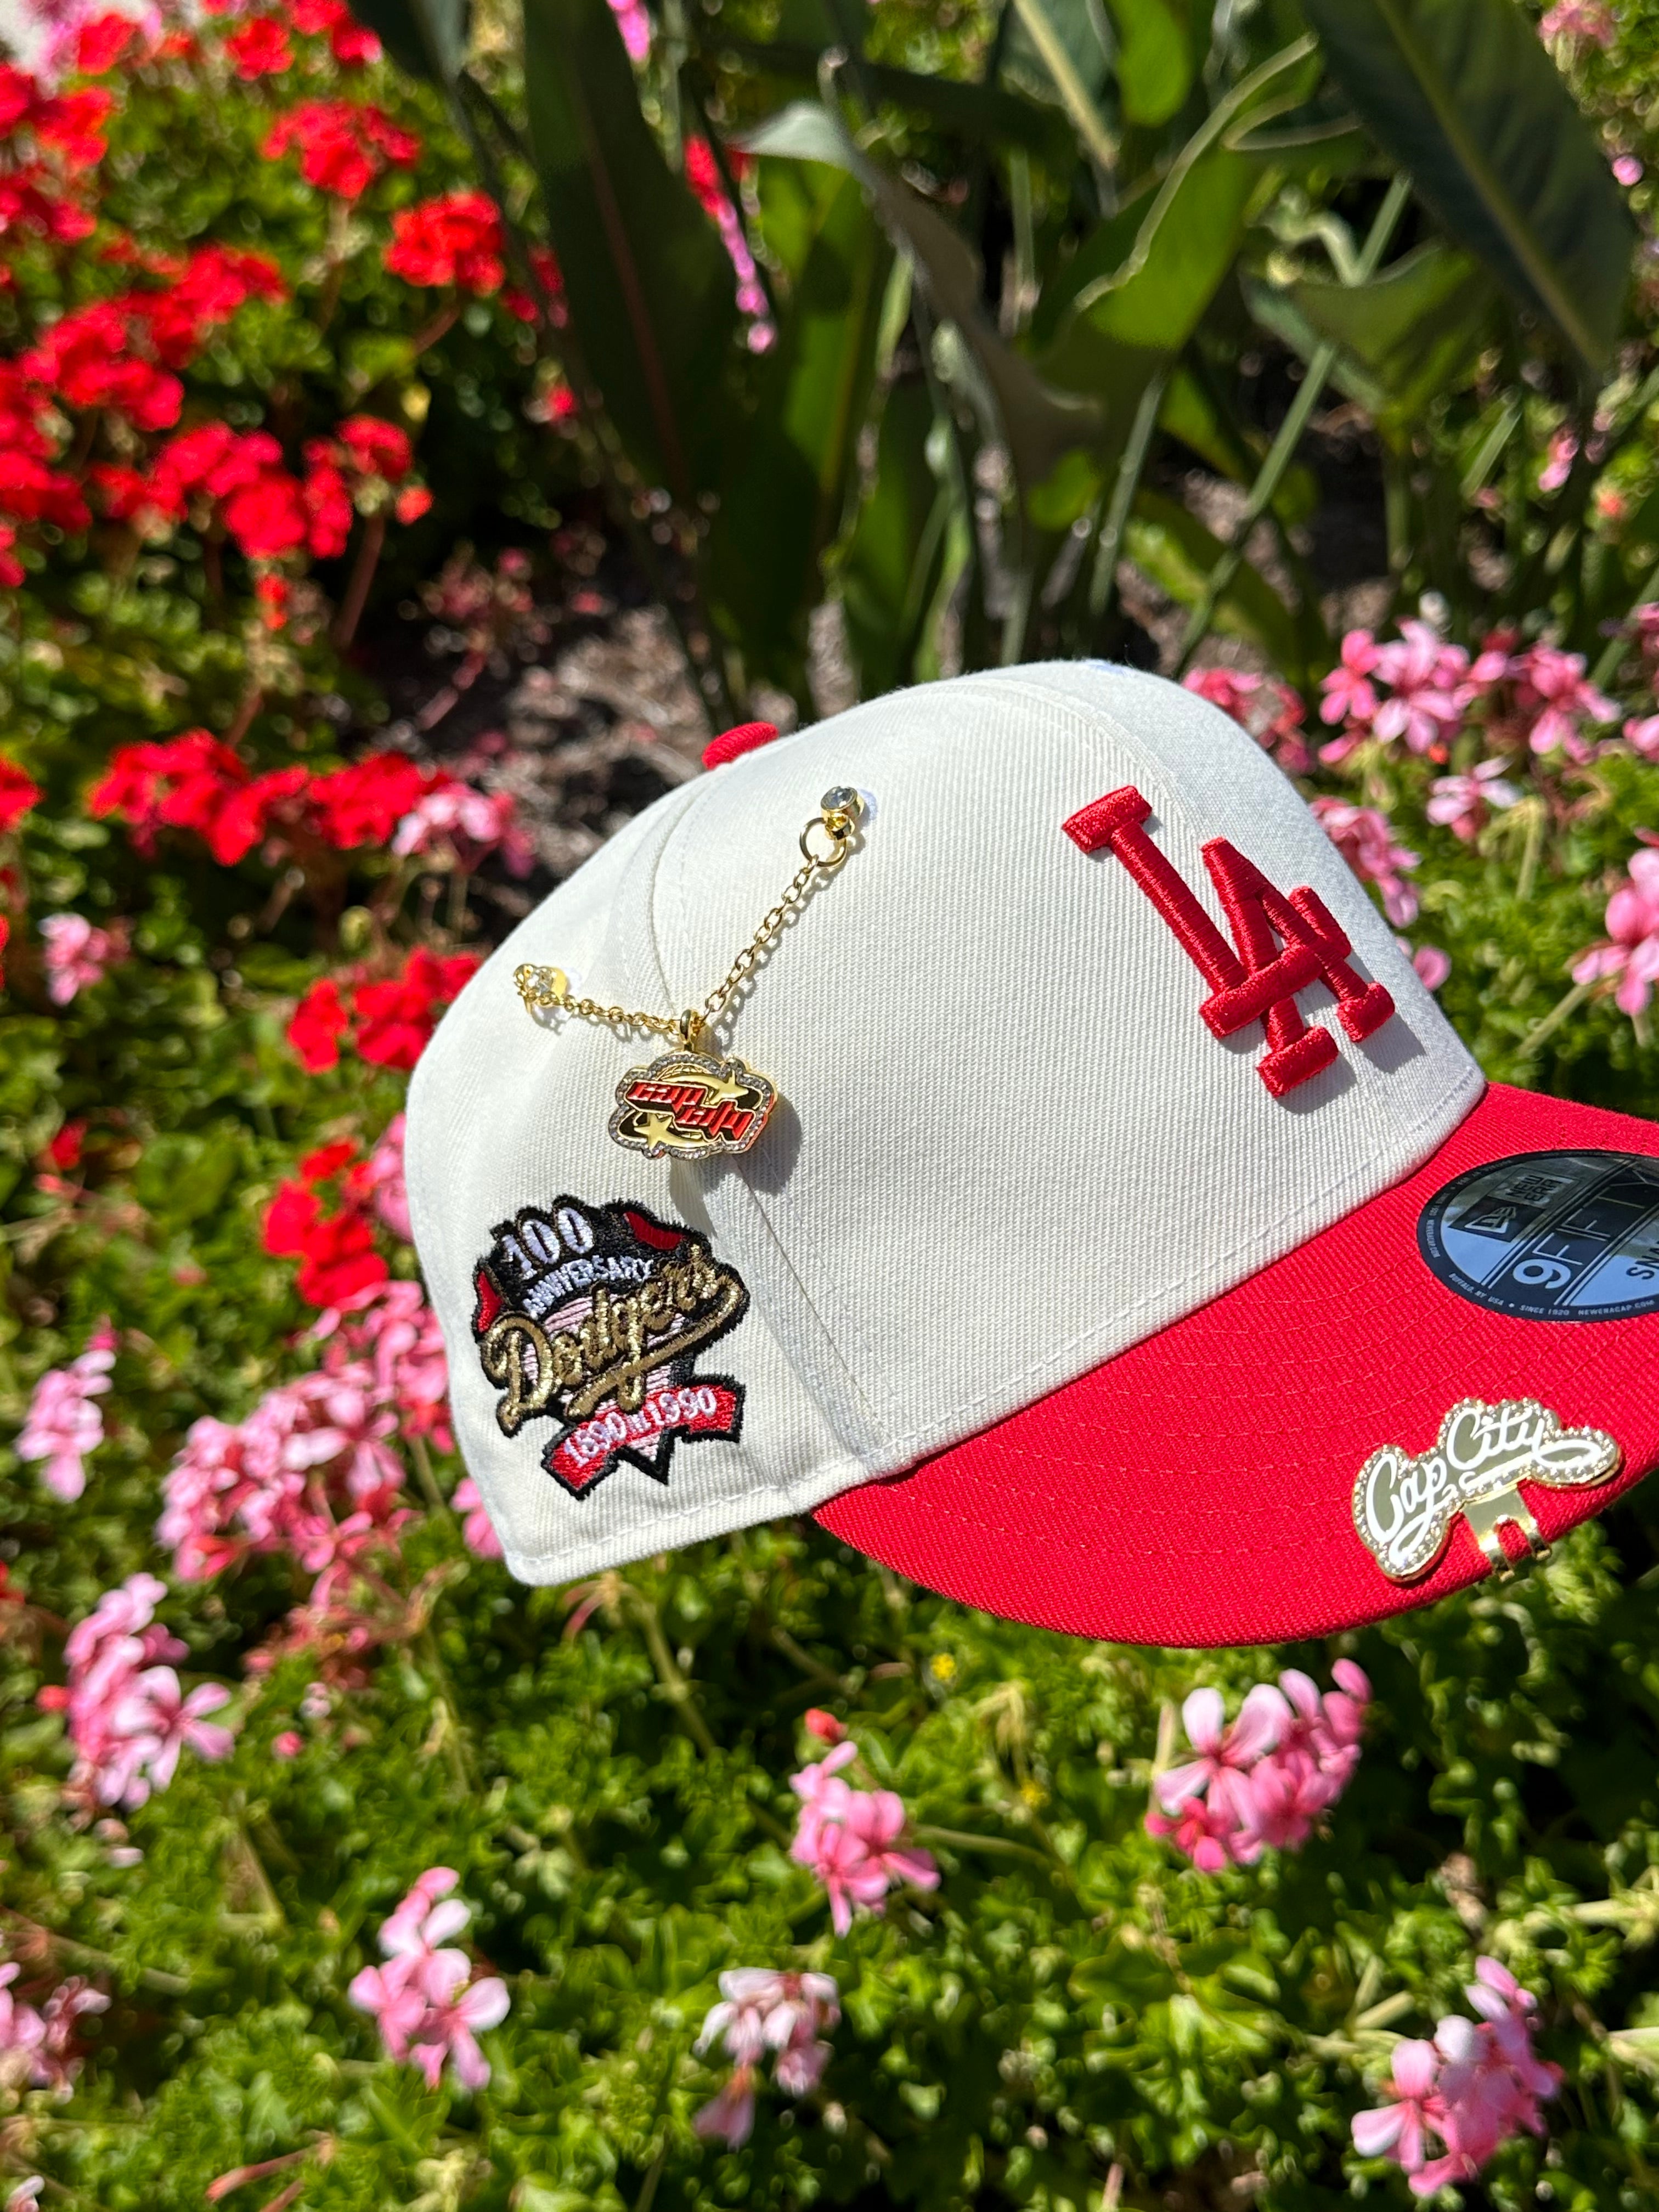 NEW ERA EXCLUSIVE 9FIFTY CHROME WHITE/RED LOS ANGELES DODGERS SNAPBACK W/ 100TH ANNIVERSARY PATCH